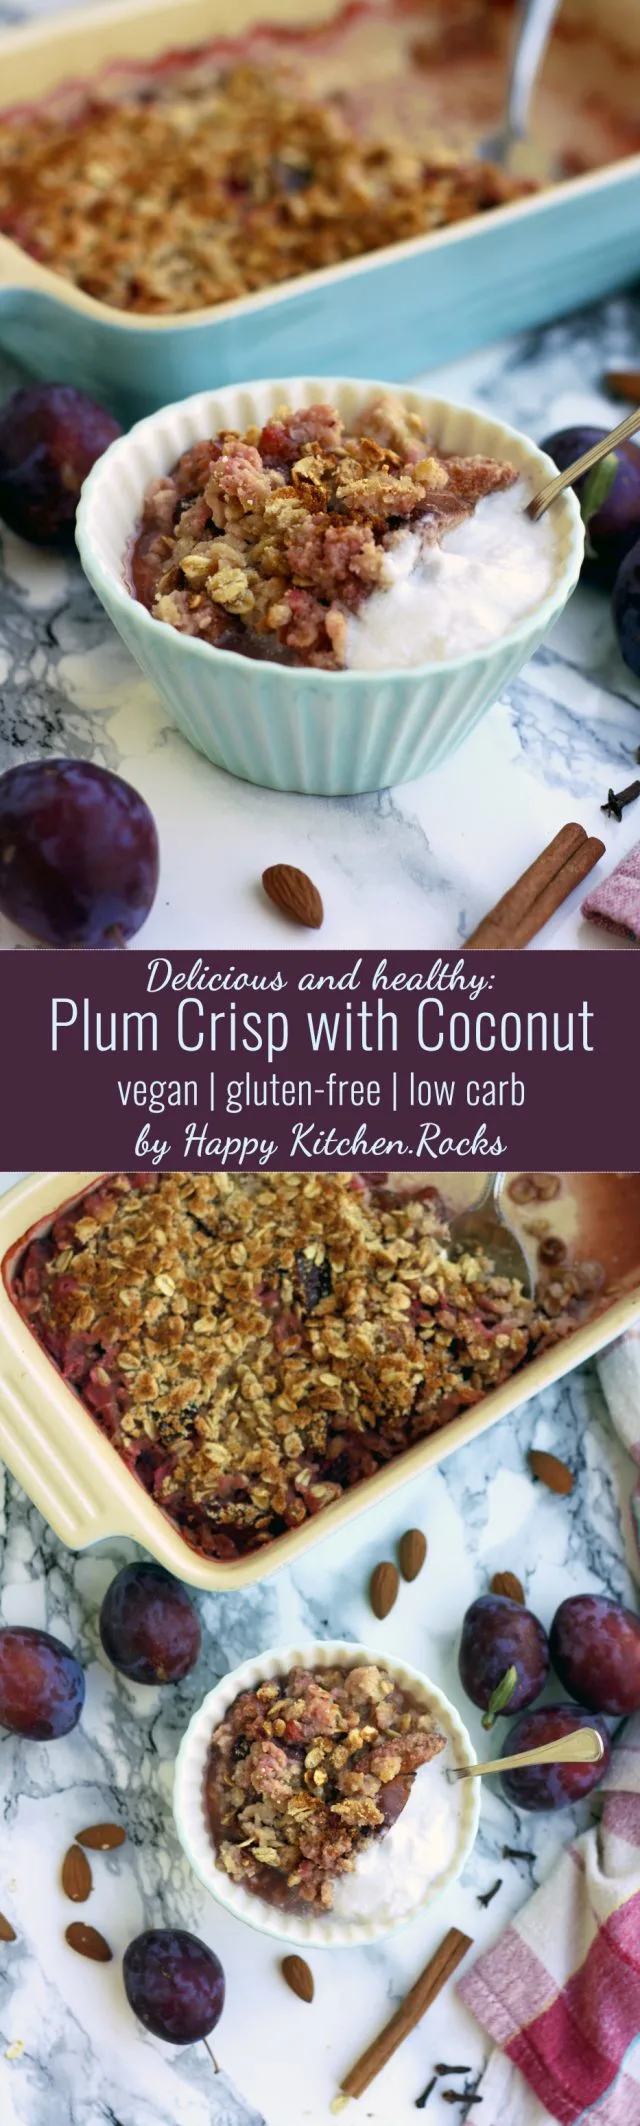 Delicious, vegan and gluten-free plum crisp with coconut makes for a great healthy dessert or breakfast. Easy 45-minute recipe from start to finish!